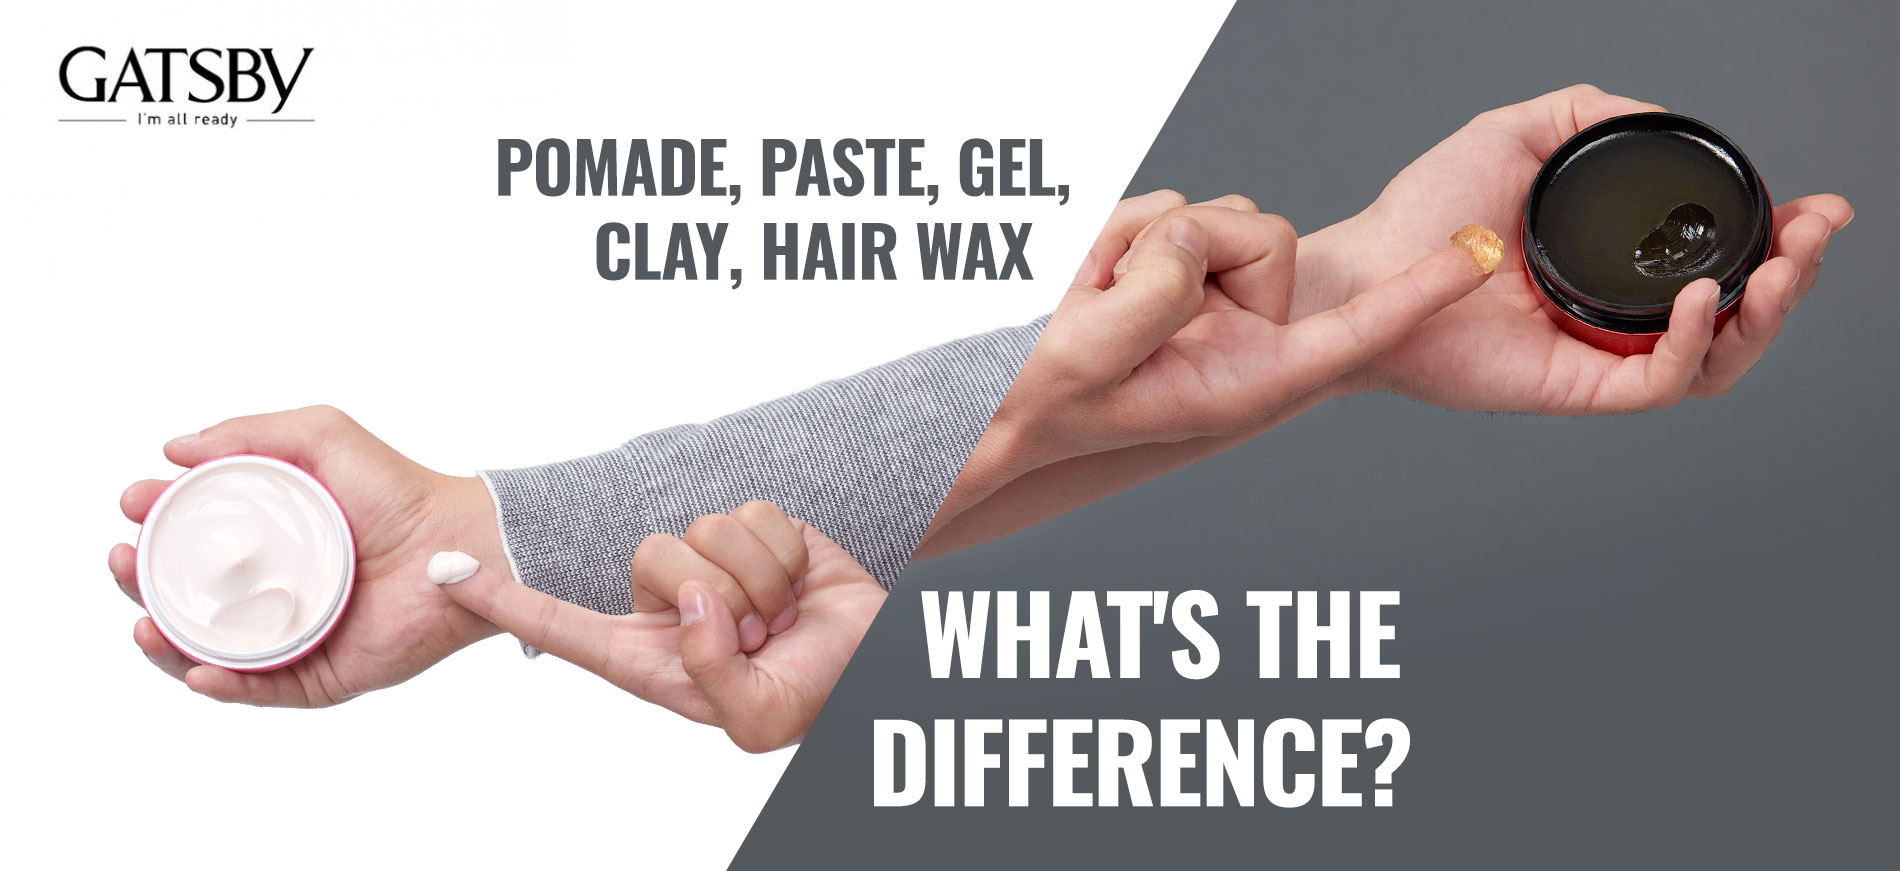 GATSBY | Pomade, Paste, Gel, Clay, Hair wax - What's the Difference